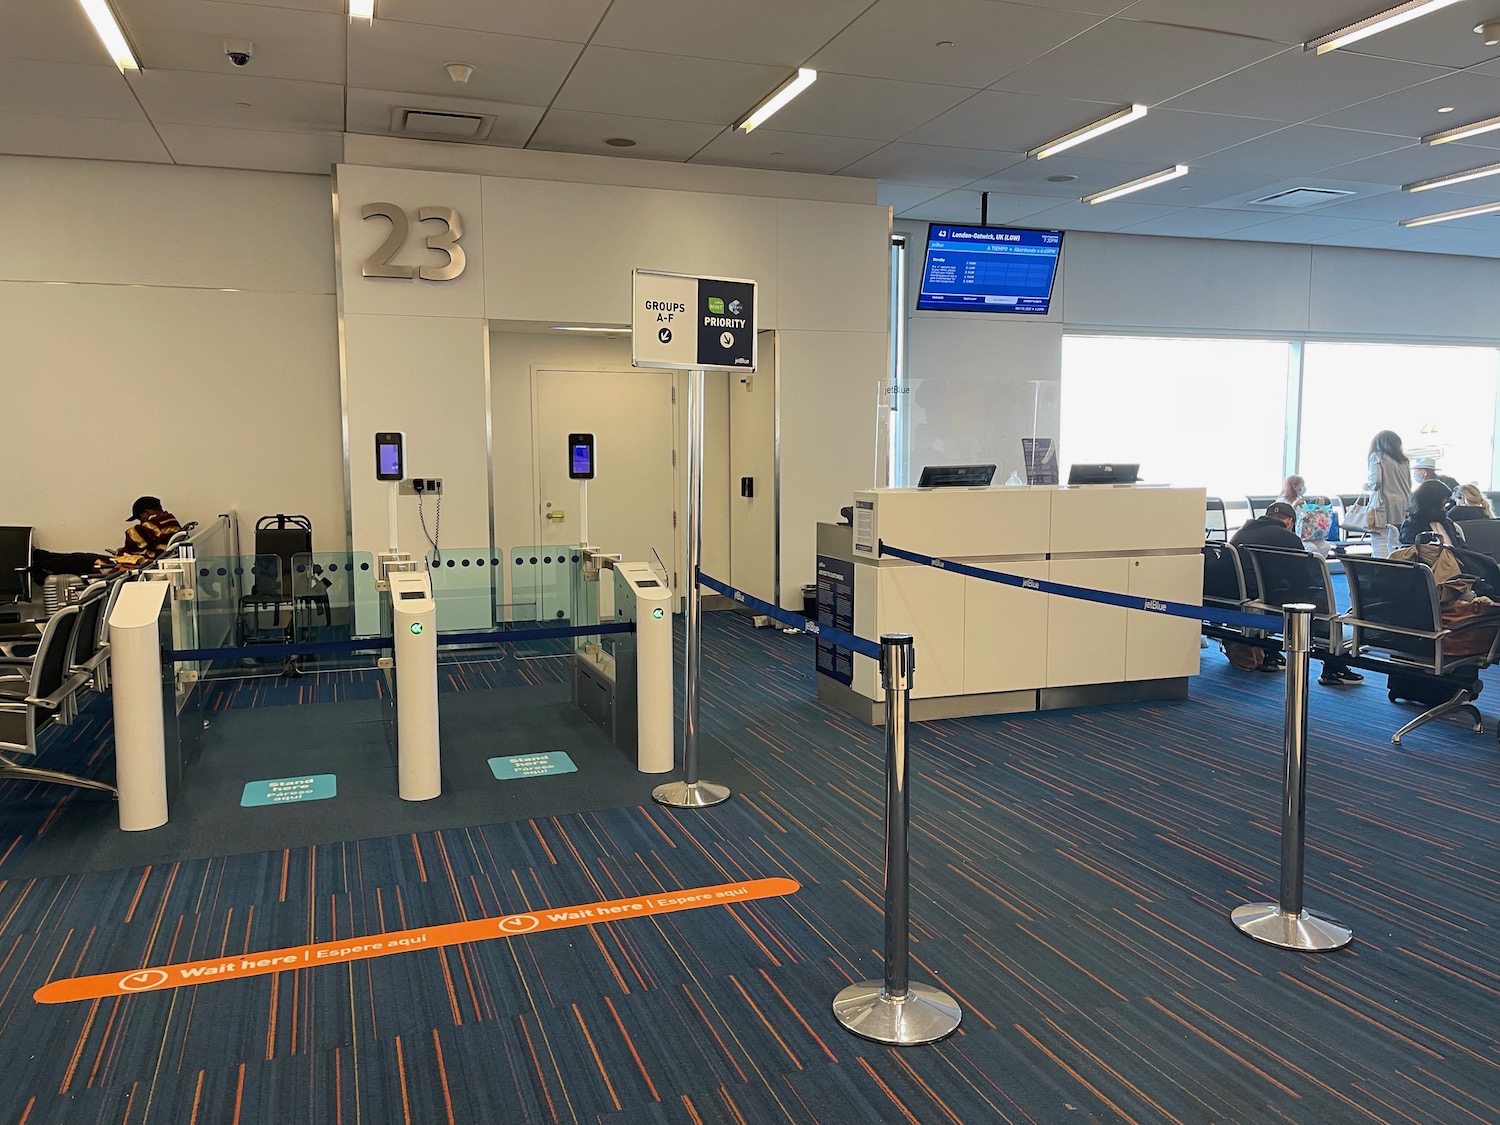 a check in area in an airport